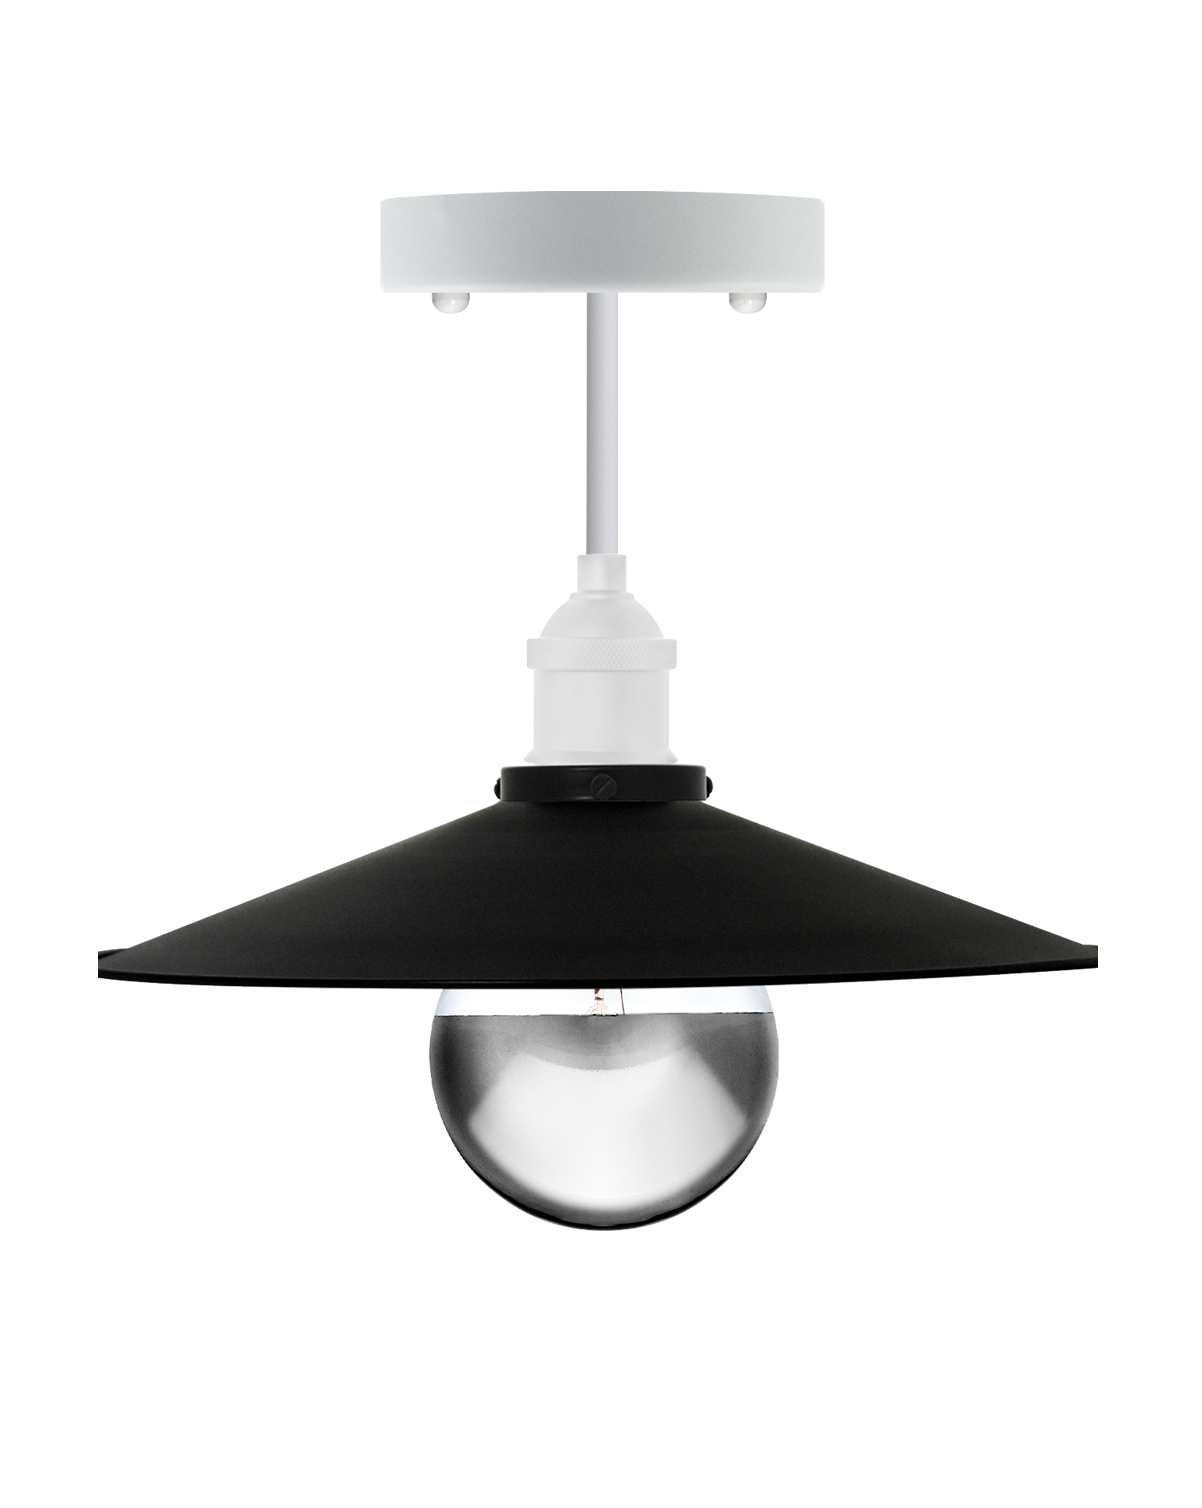 Semi-flush mount light fixture with a white base, black shade, and an exposed chrome dipped bulb.